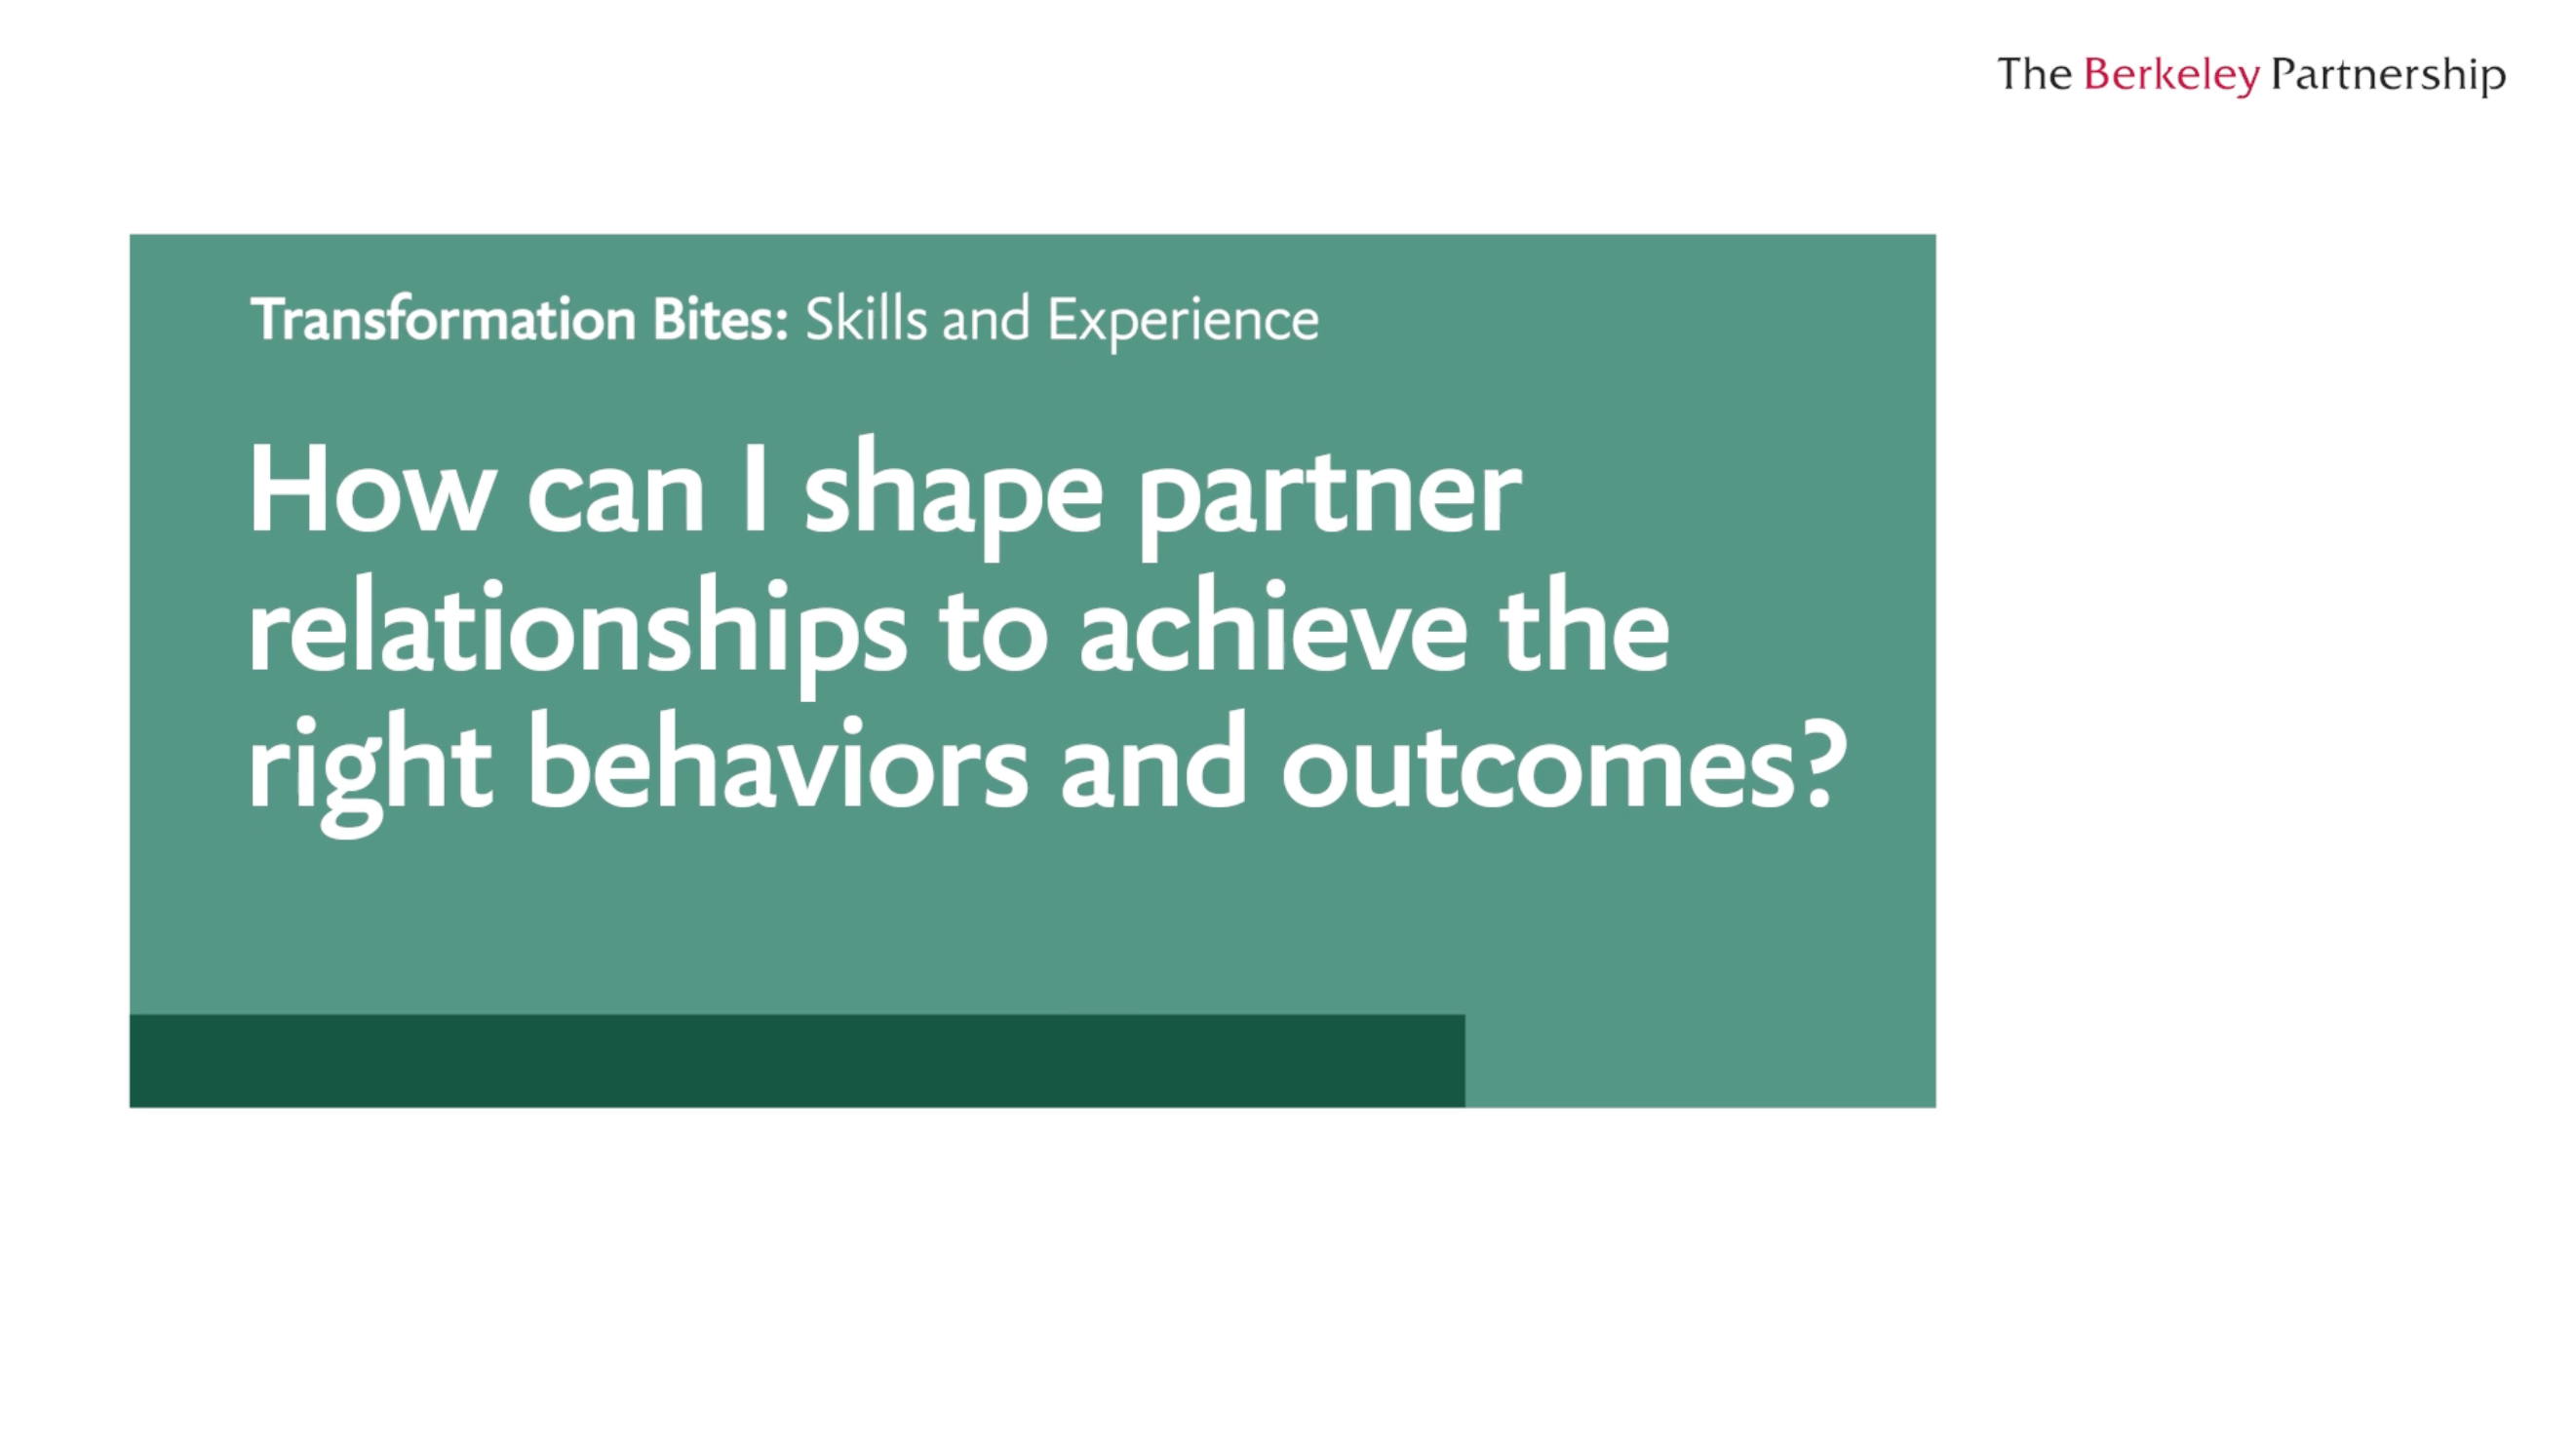 How can I shape partner relationships to encourage the right behaviors and outcomes?